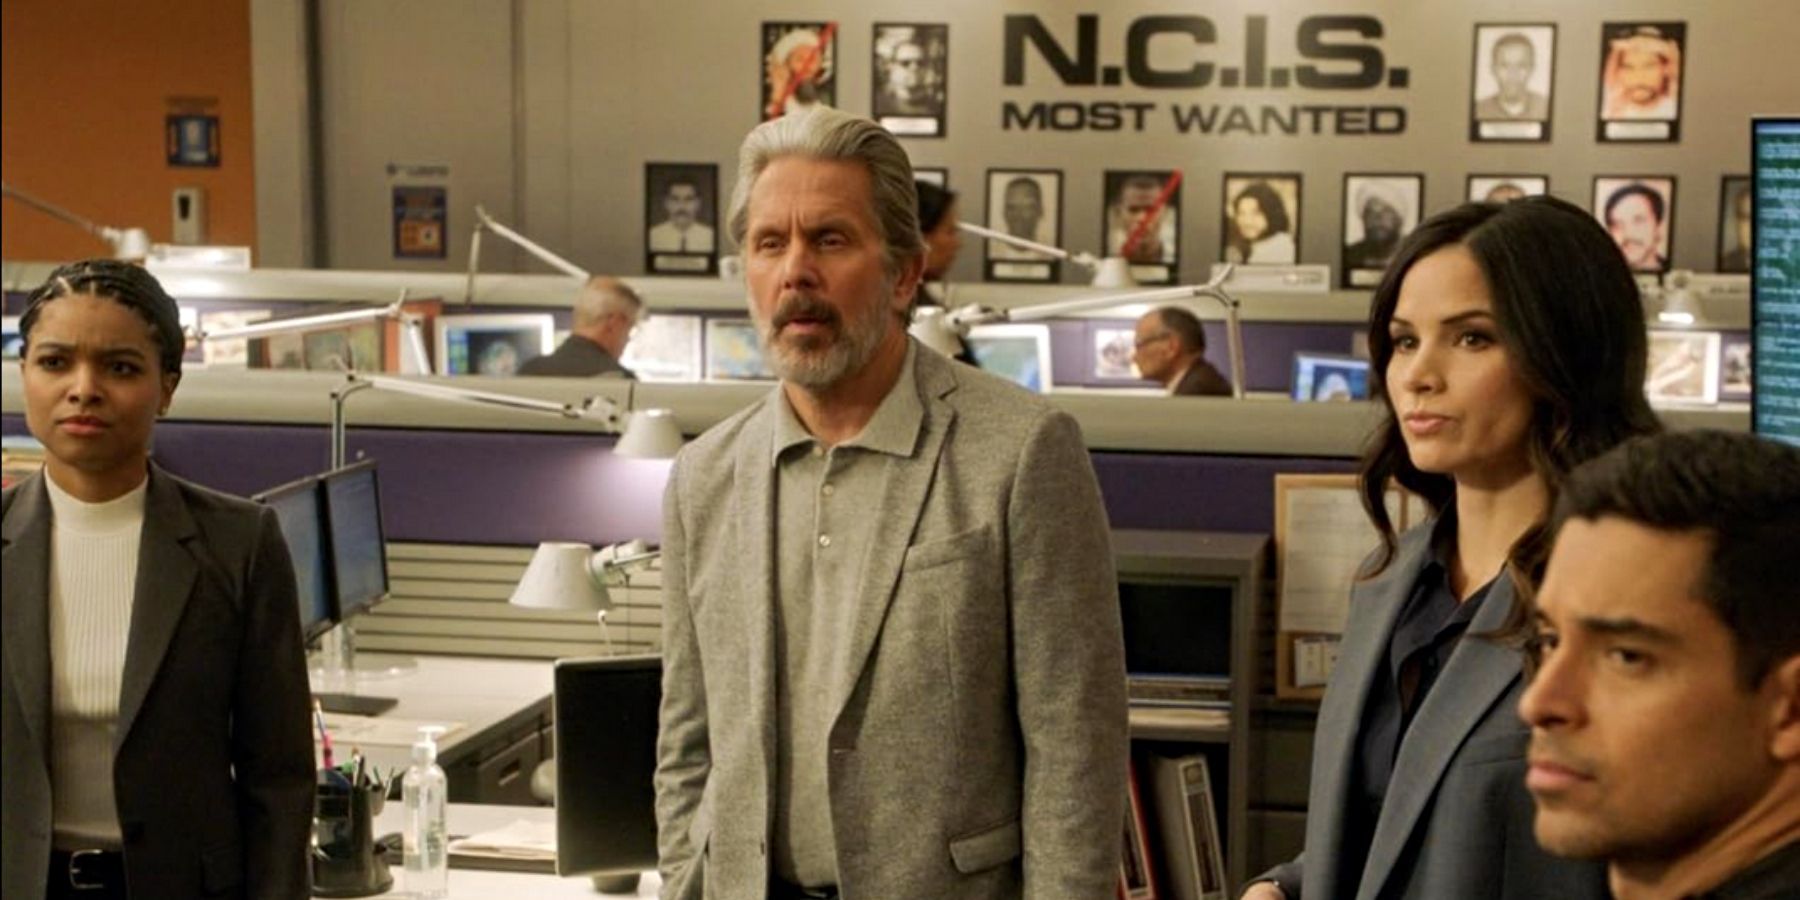 Alden Parker (Gary Cole) planning out an investigation with the cast in NCIS